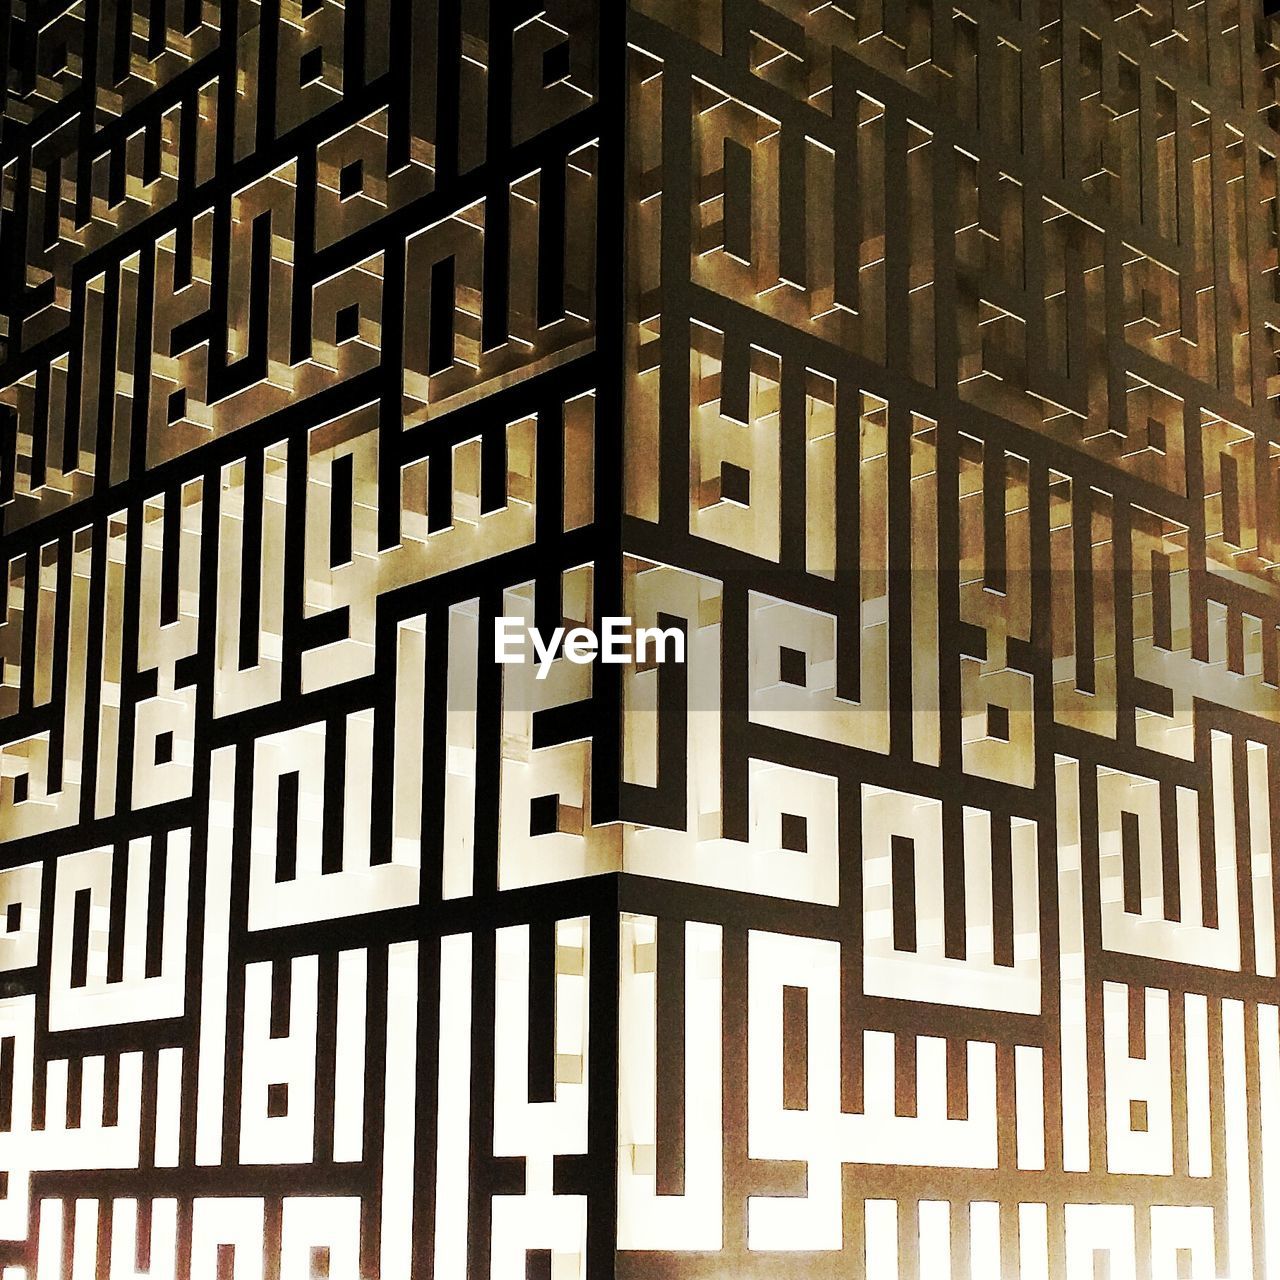 Full frame shot of a mosque islamic calligraphy 